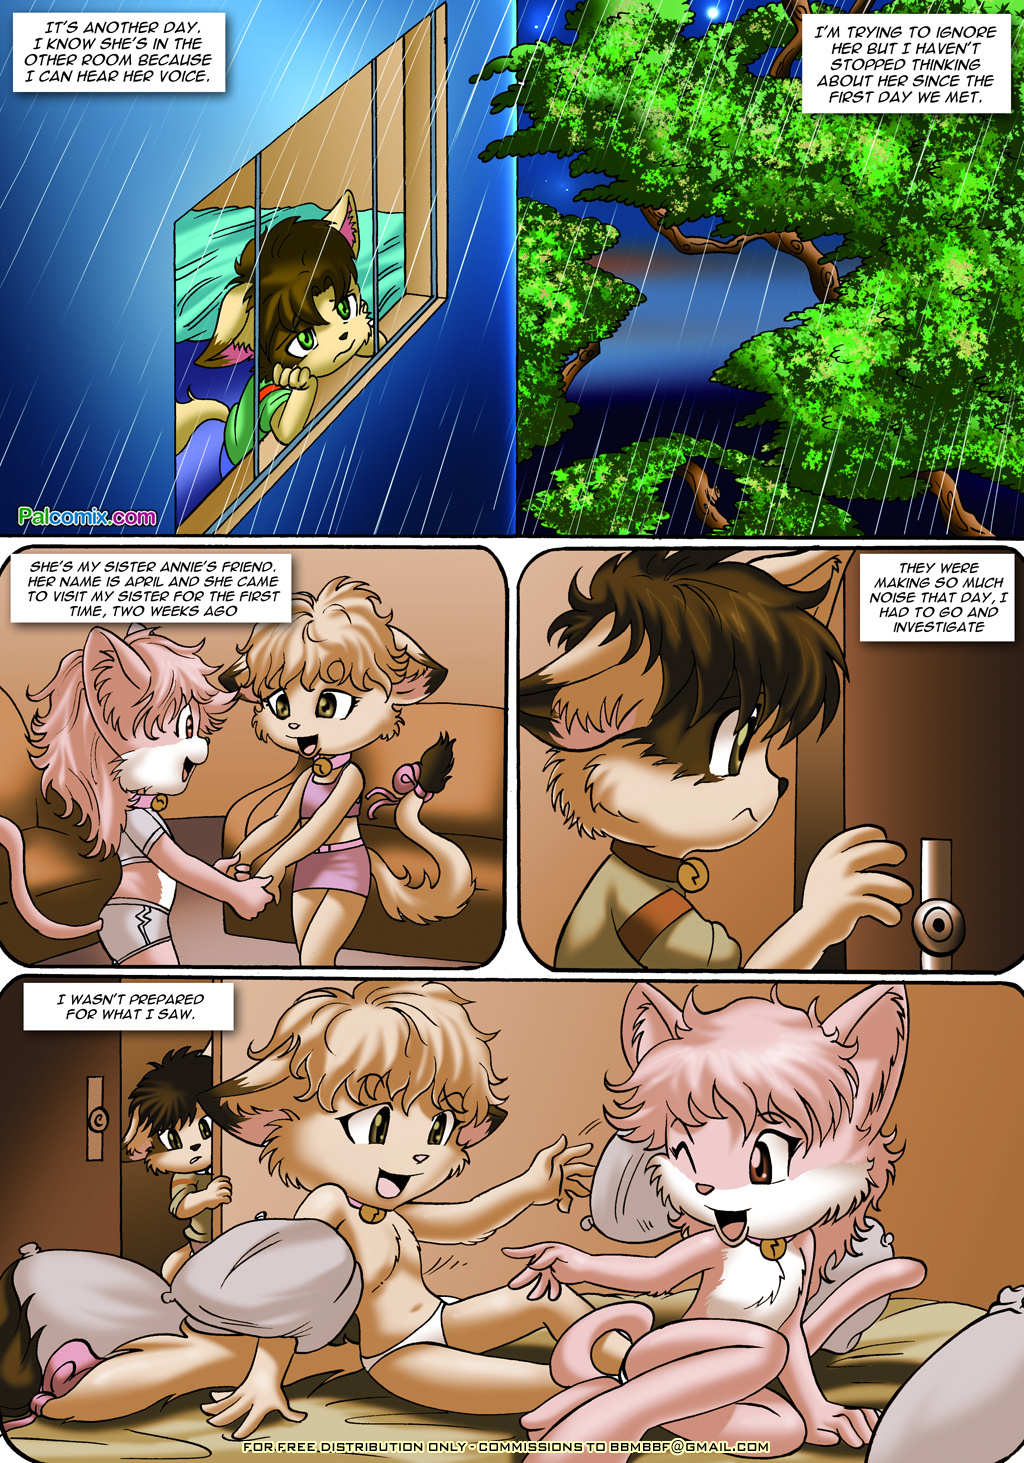 Those Good Old Games - Chapter 2 - Here Comes April porn comic Oral sex, Blowjob, Cum Shots, cunnilingus, Furry, Group Sex, incest, Straight, Threesome